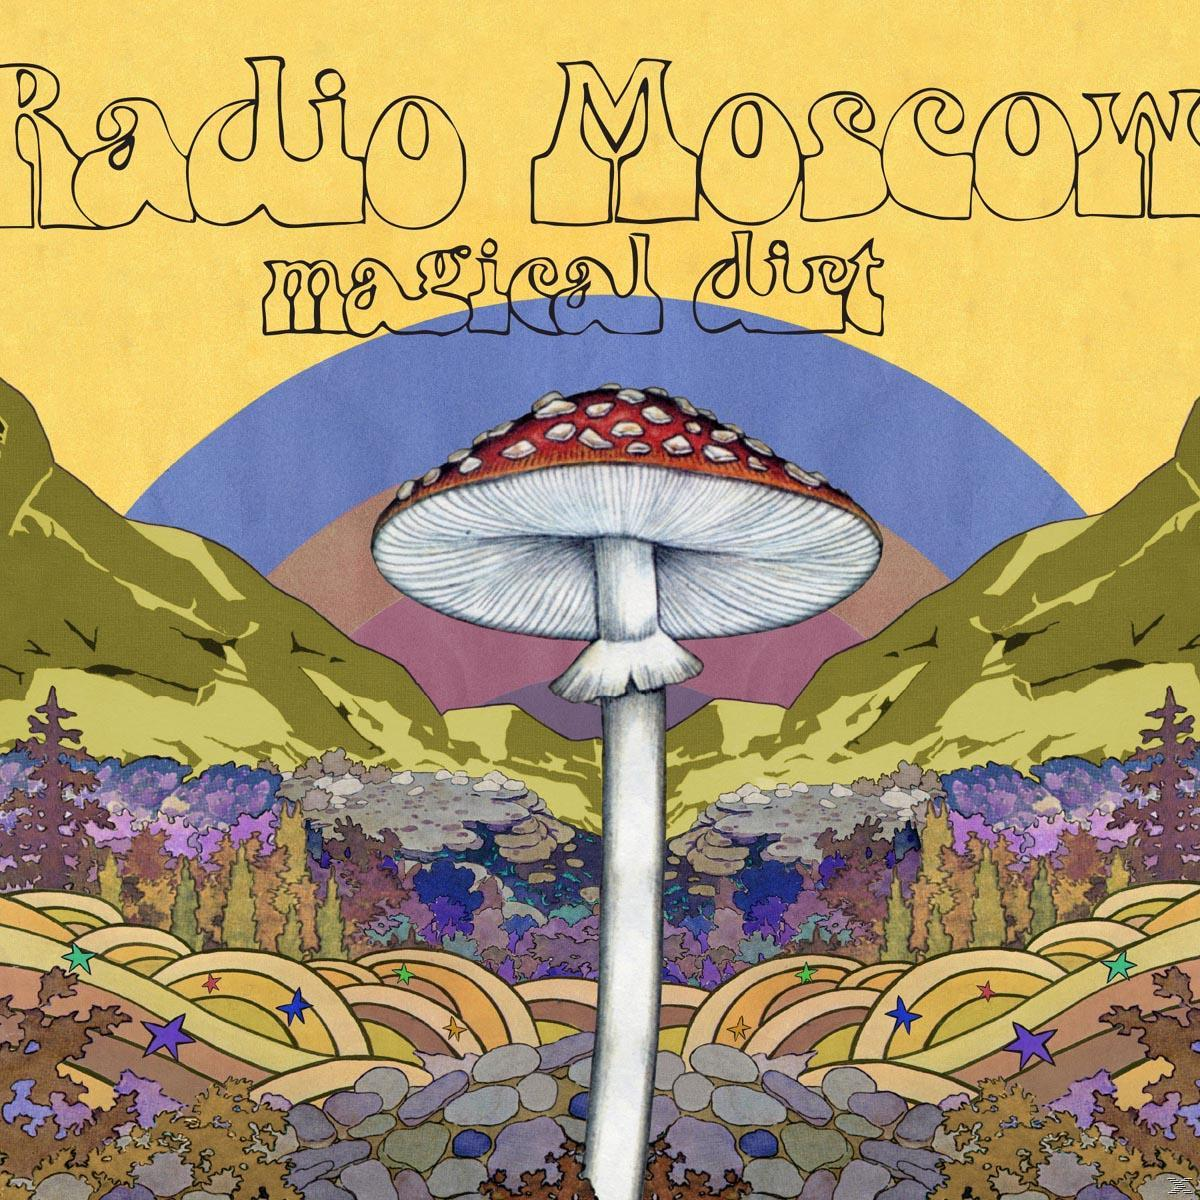 Radio Moscow (CD) - - Magical Dirt